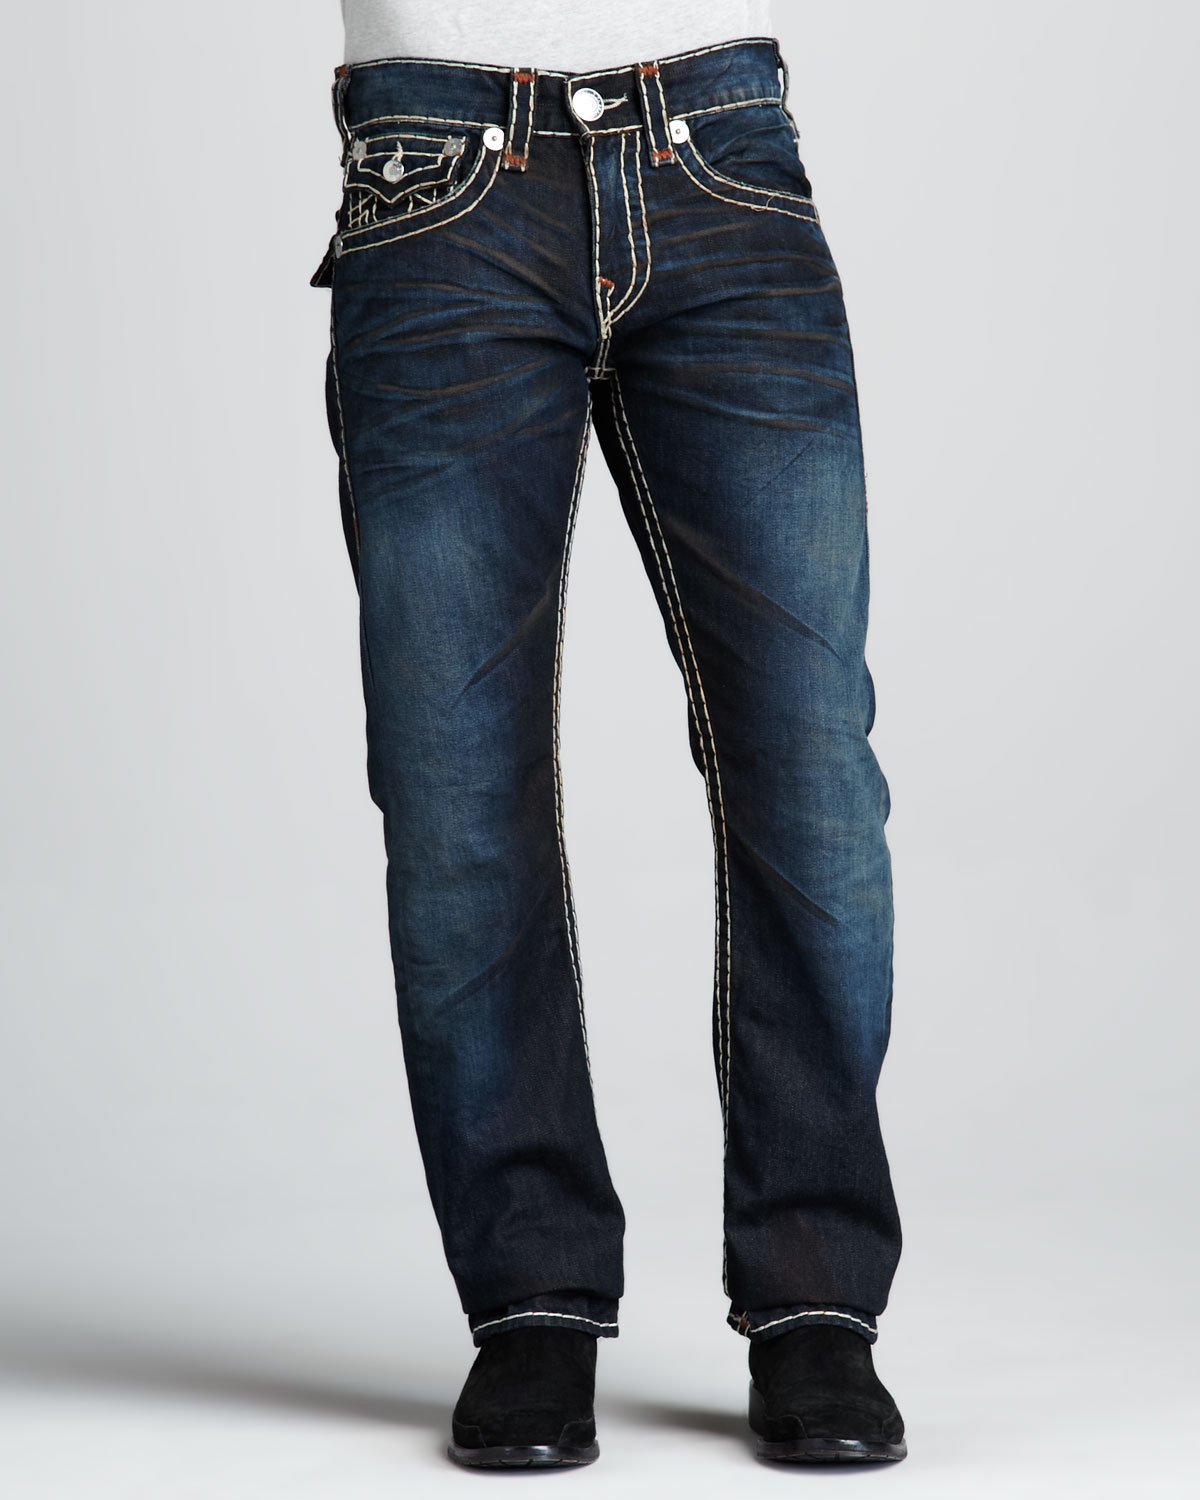 Lyst - True Religion Ricky Super T Collateral Jeans in Blue for Men